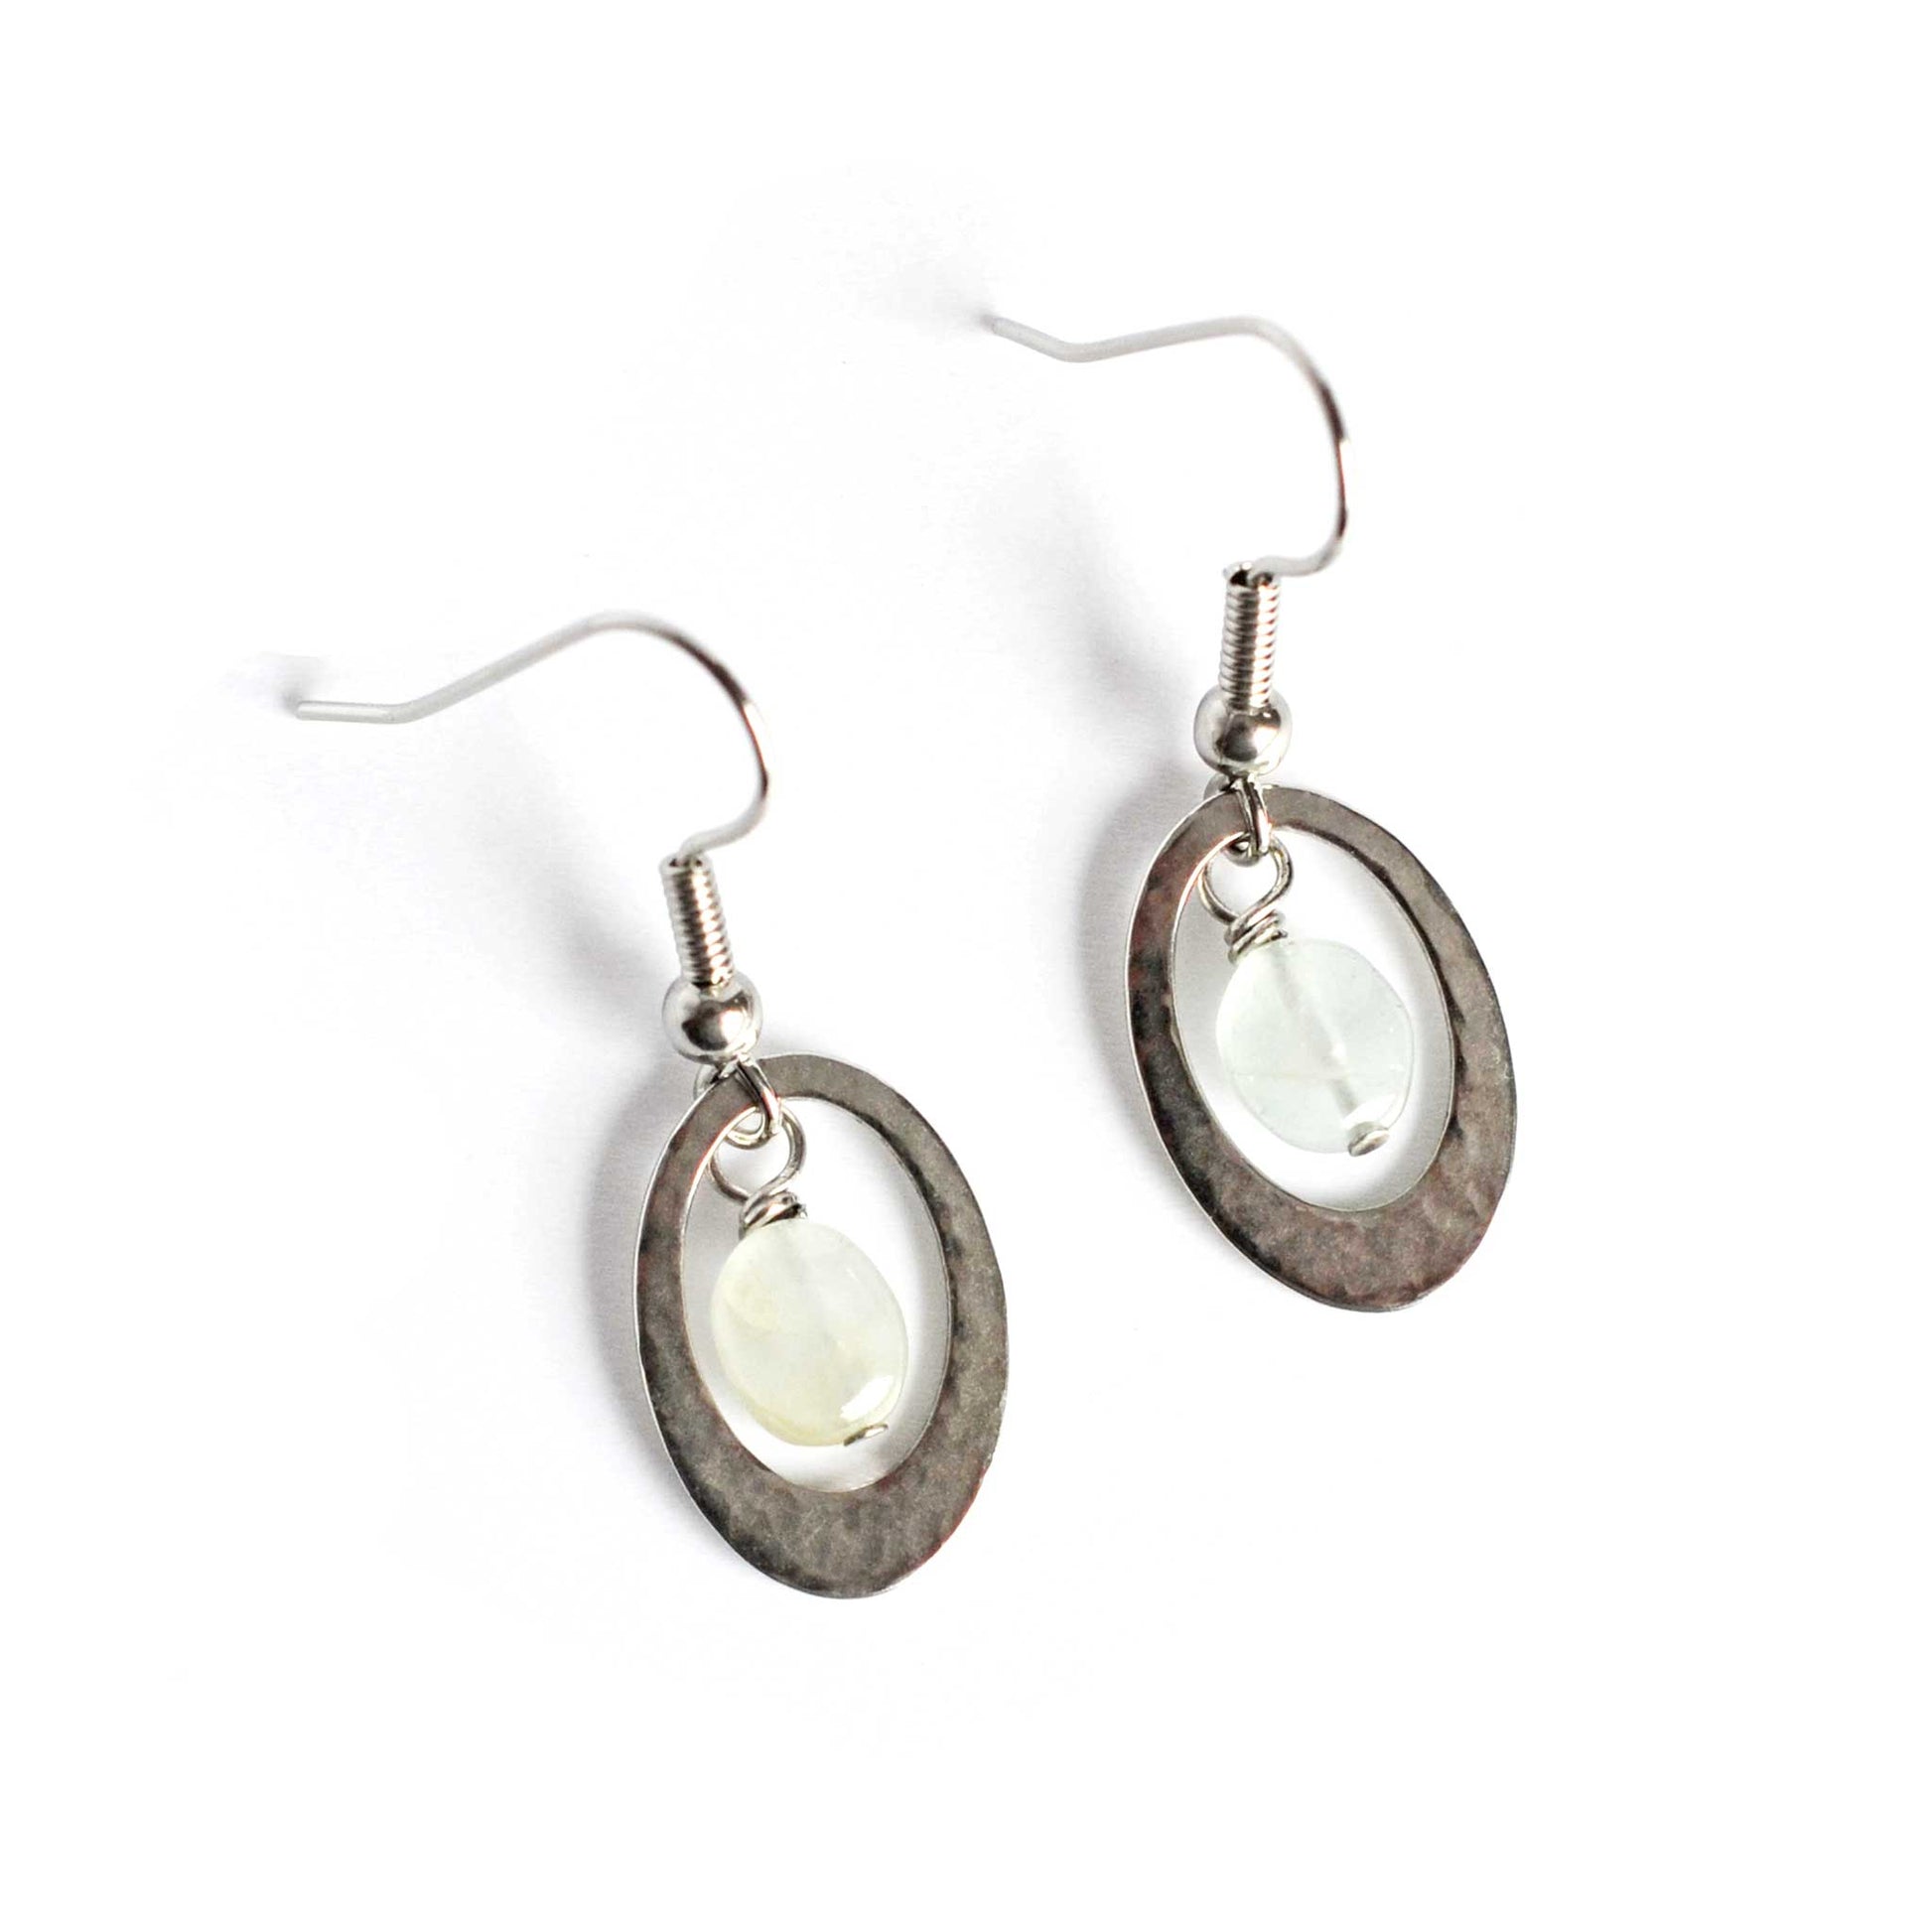 Oval drop earrings with central Aquamarine gemstone on white background.